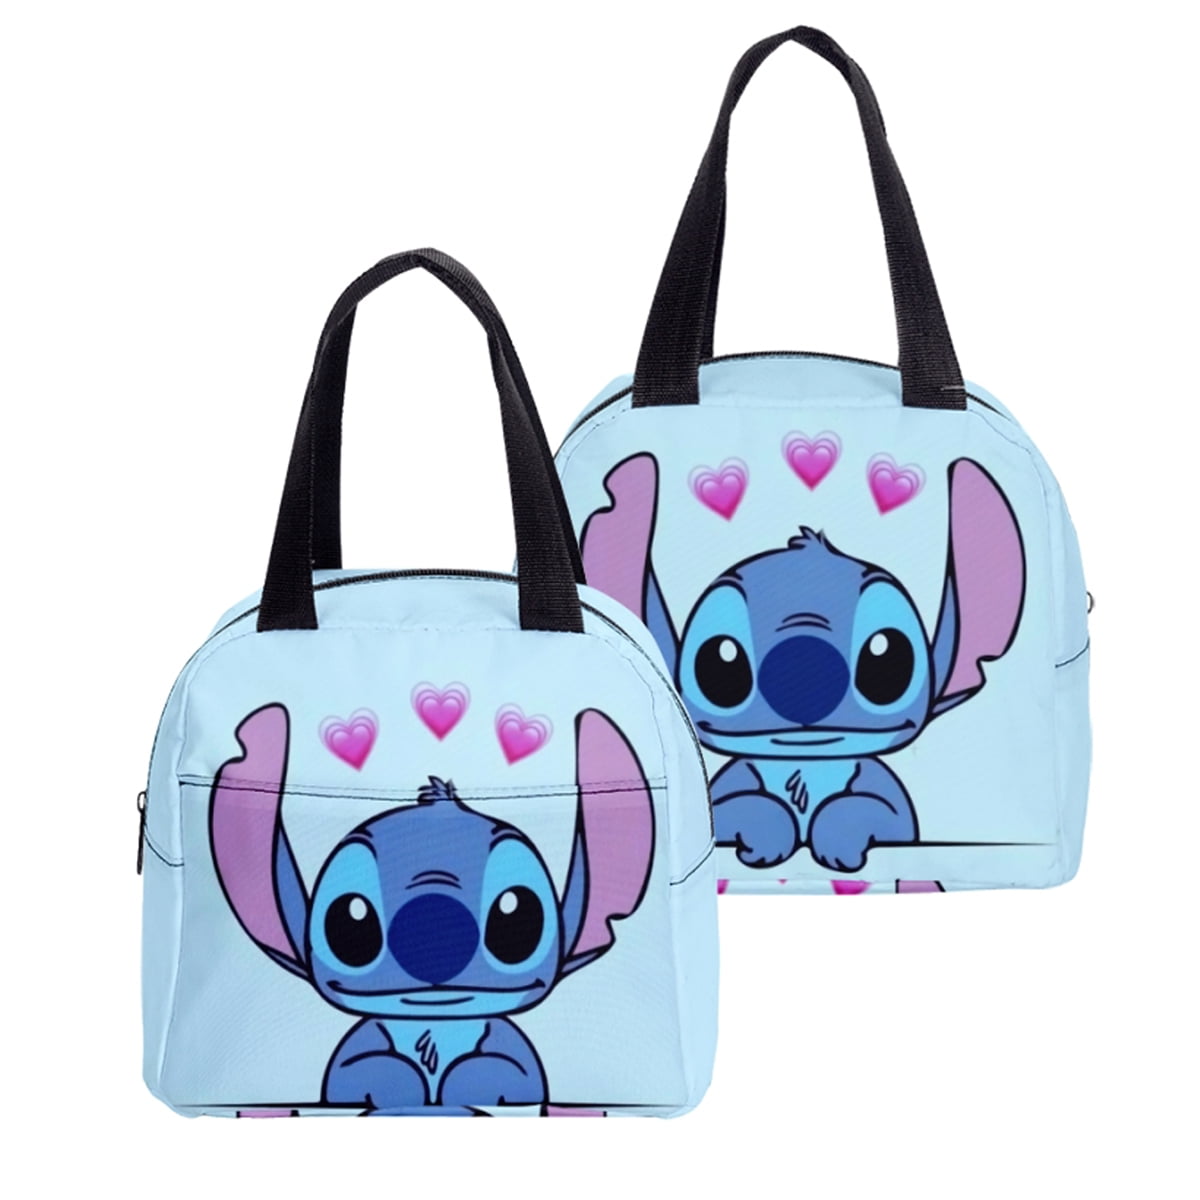 Stitch Lightweight Lunch Bag, Travel Cute Lunch Box with